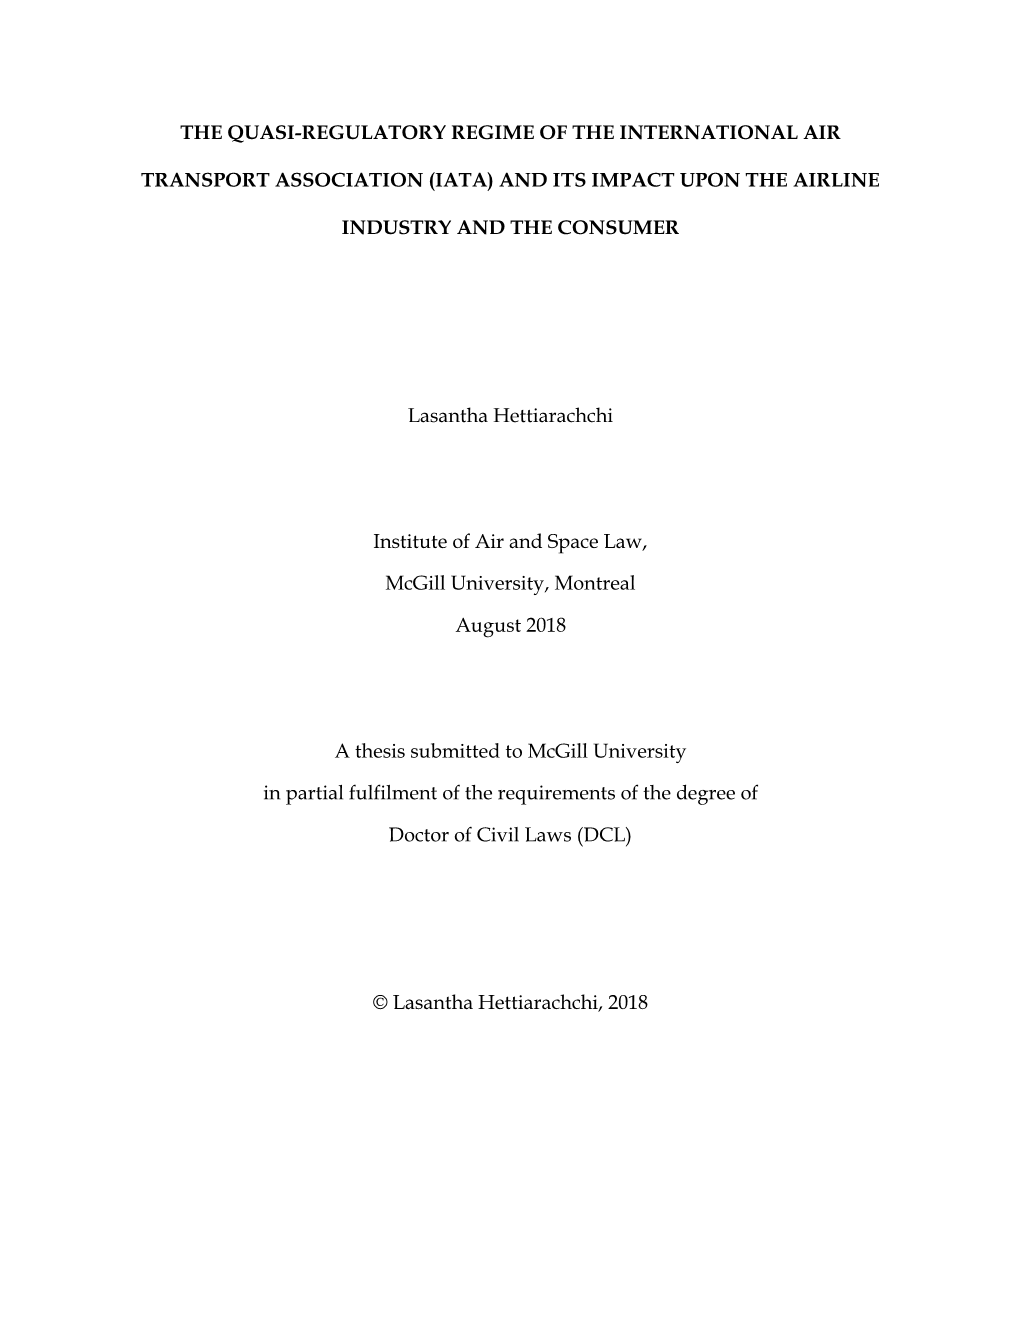 The Quasi-Regulatory Regime of the International Air Transport Association (Iata) and Its Impact Upon the Airline Industry and T